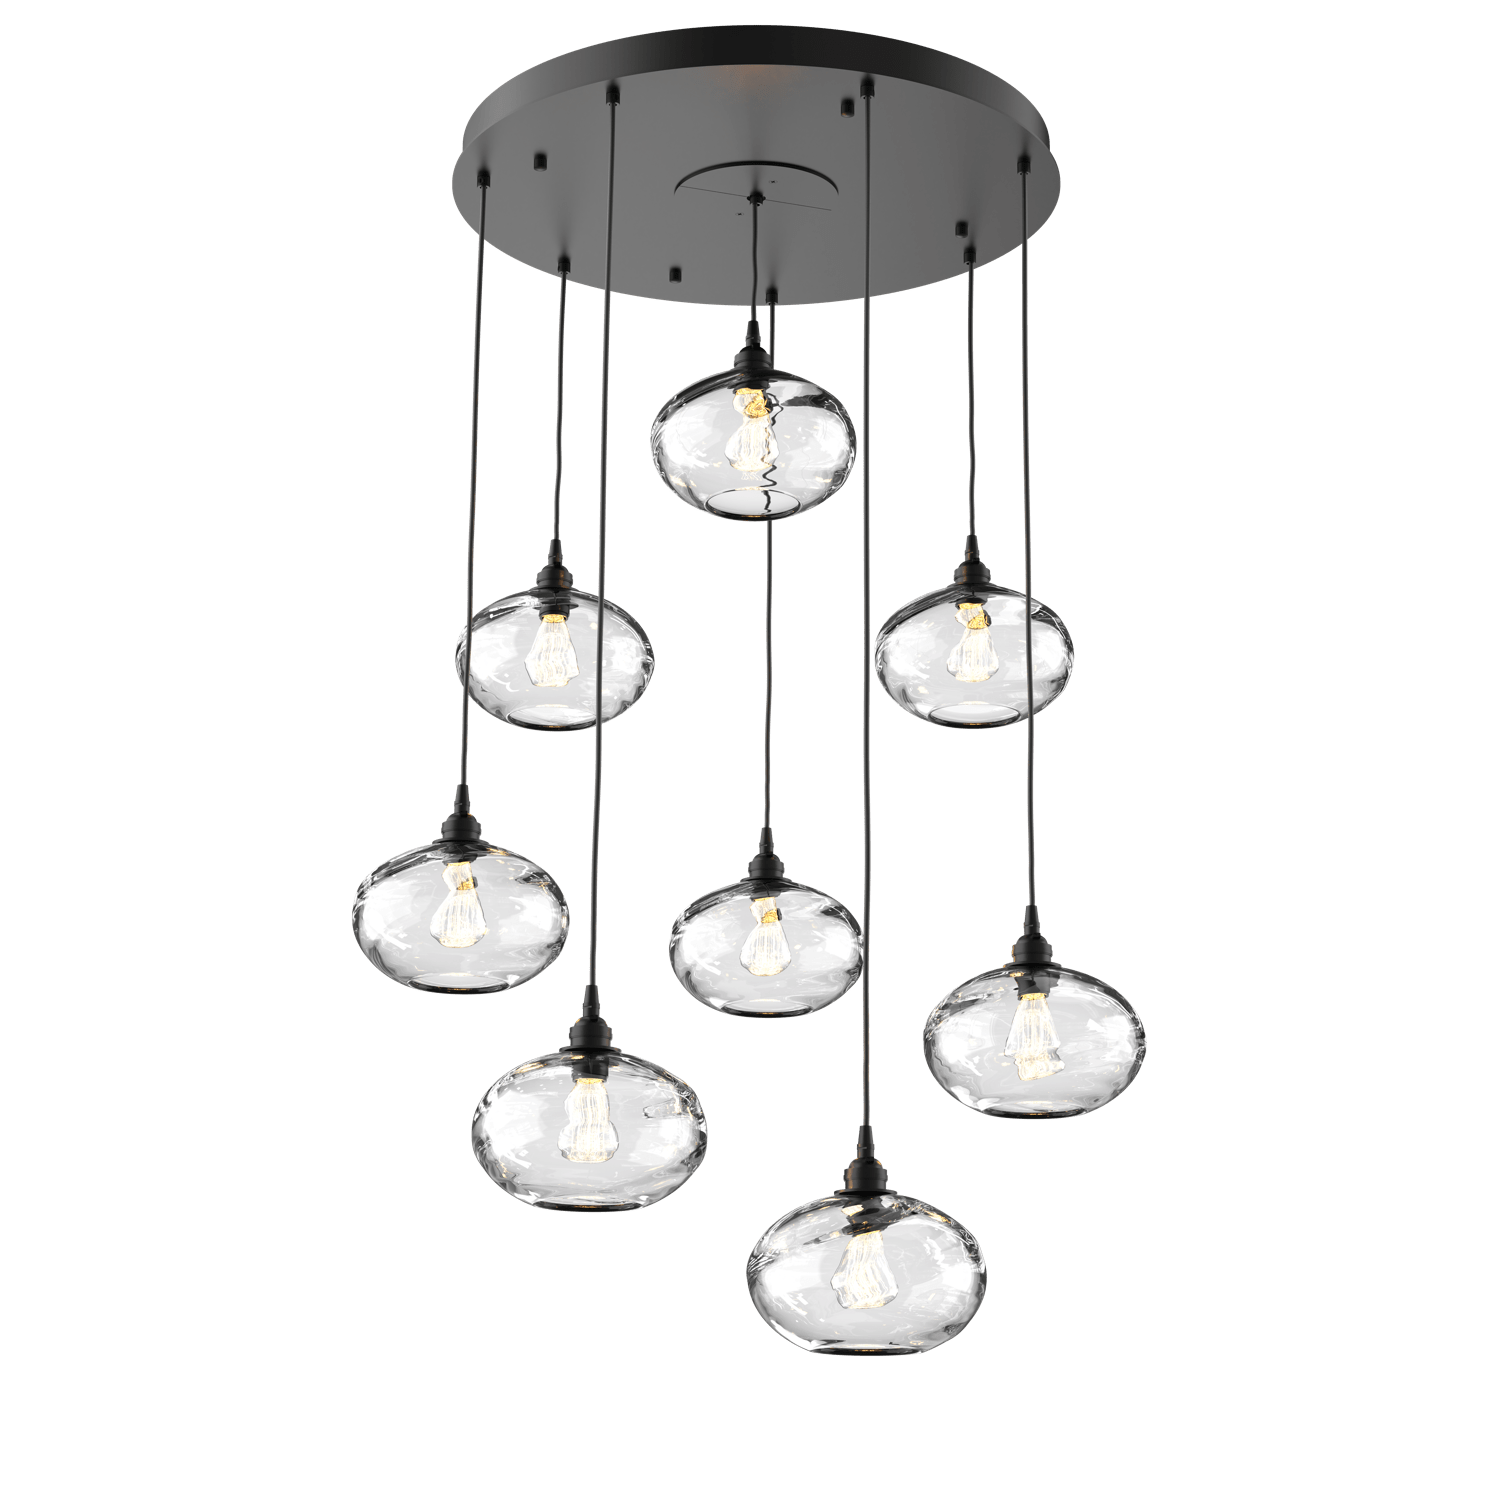 CHB0036-08-MB-OC-Hammerton-Studio-Optic-Blown-Glass-Coppa-8-light-round-pendant-chandelier-with-matte-black-finish-and-optic-clear-blown-glass-shades-and-incandescent-lamping